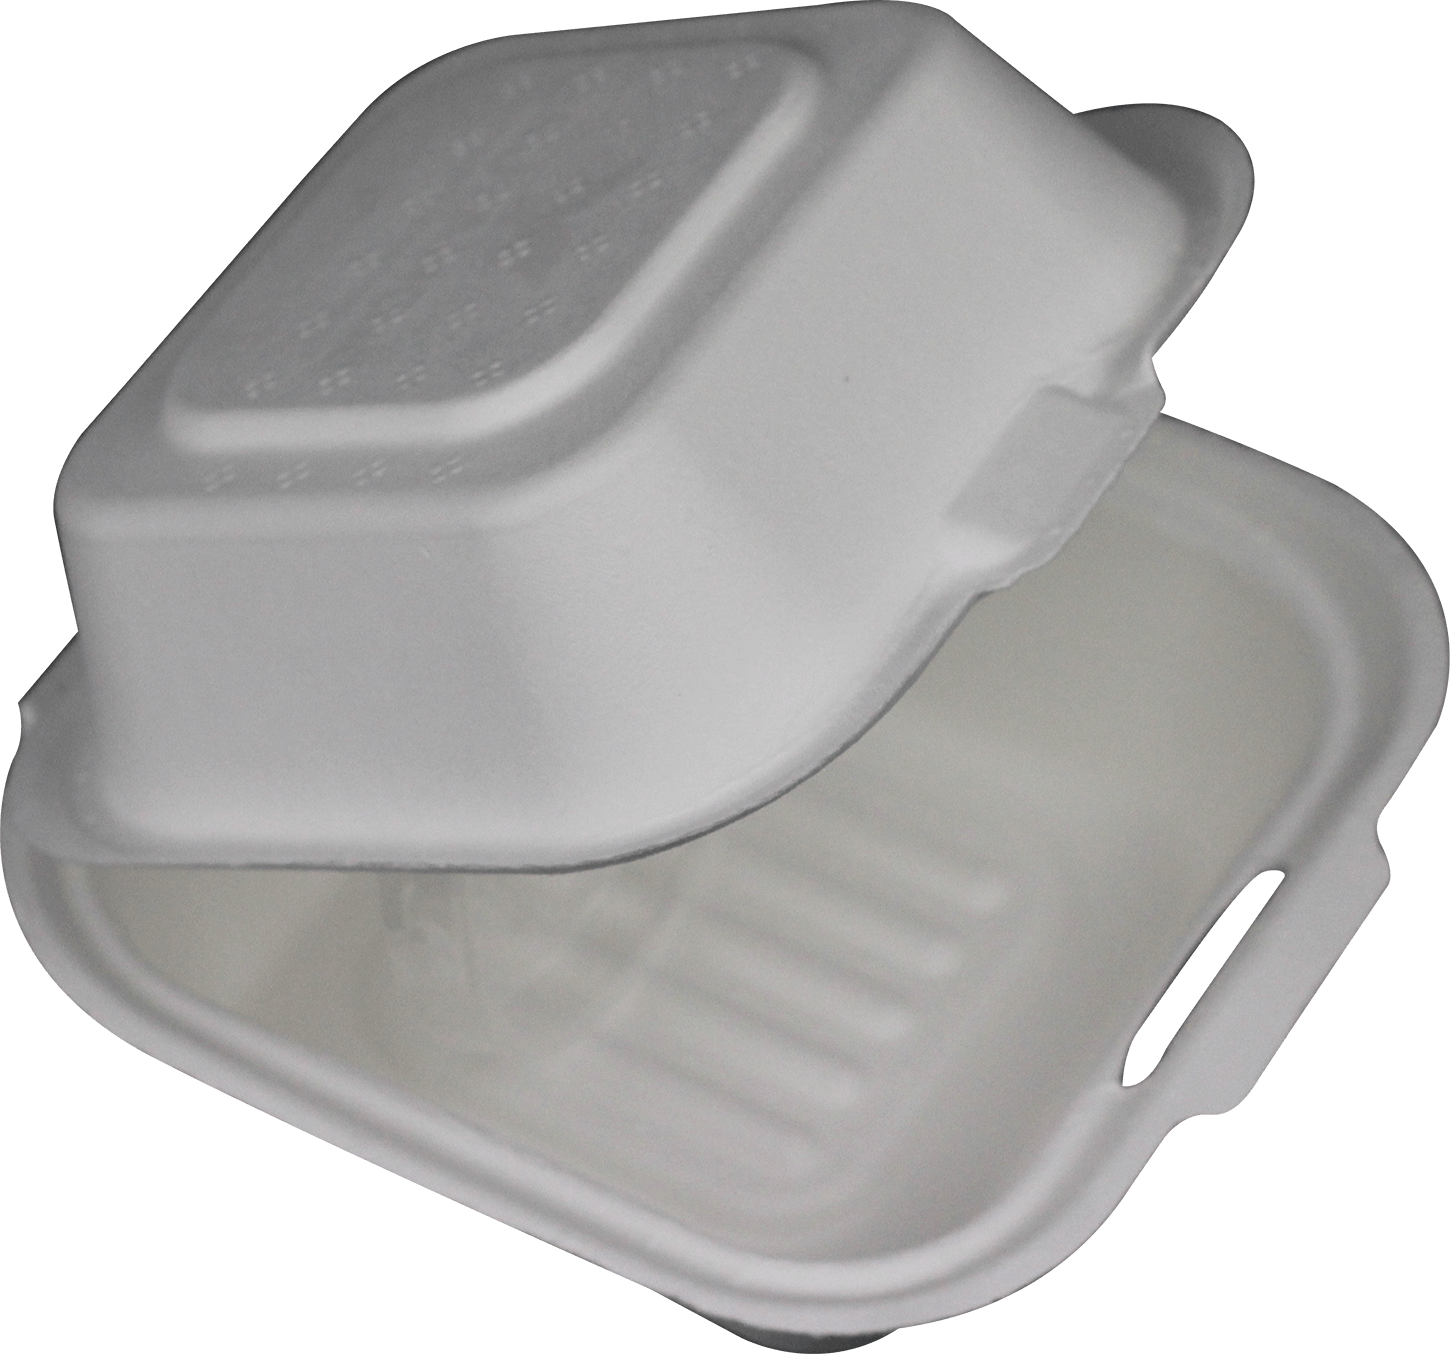 6X6 1C-COMPOSTABLE HINGED LID CONTAINER